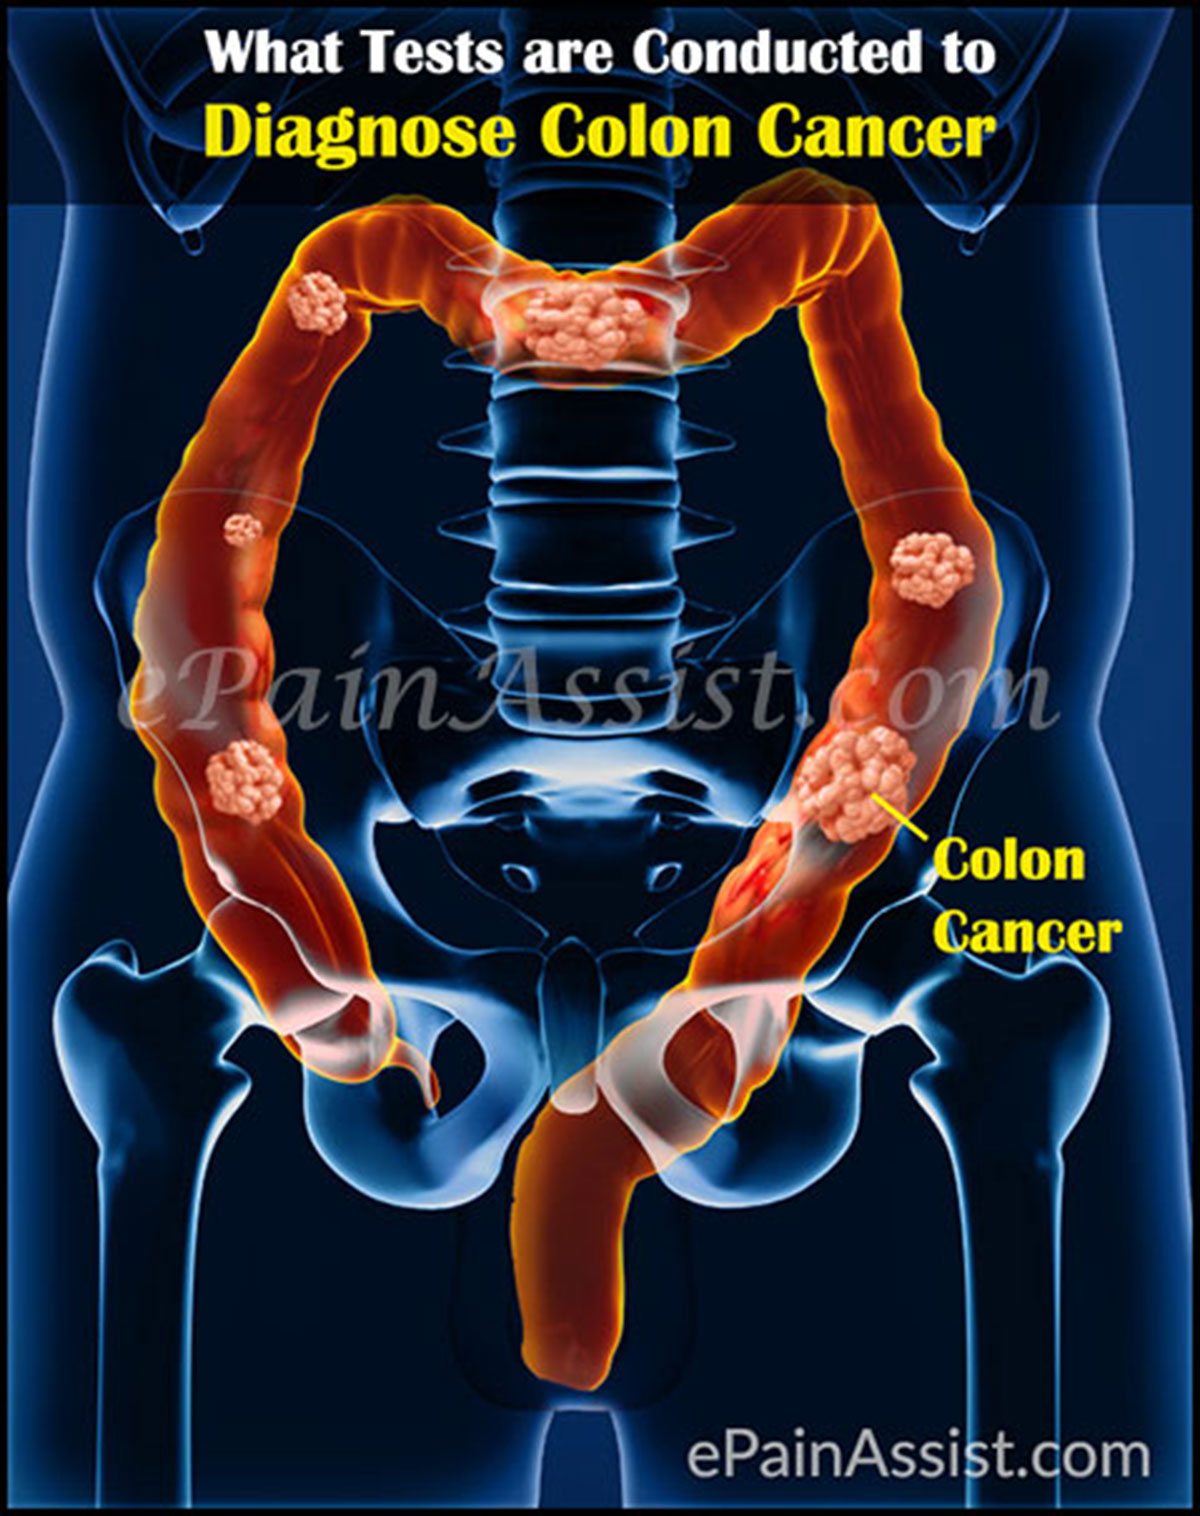 Diagnosis, Stages, Treatment of Colon Cancer or Cancer of the Colon